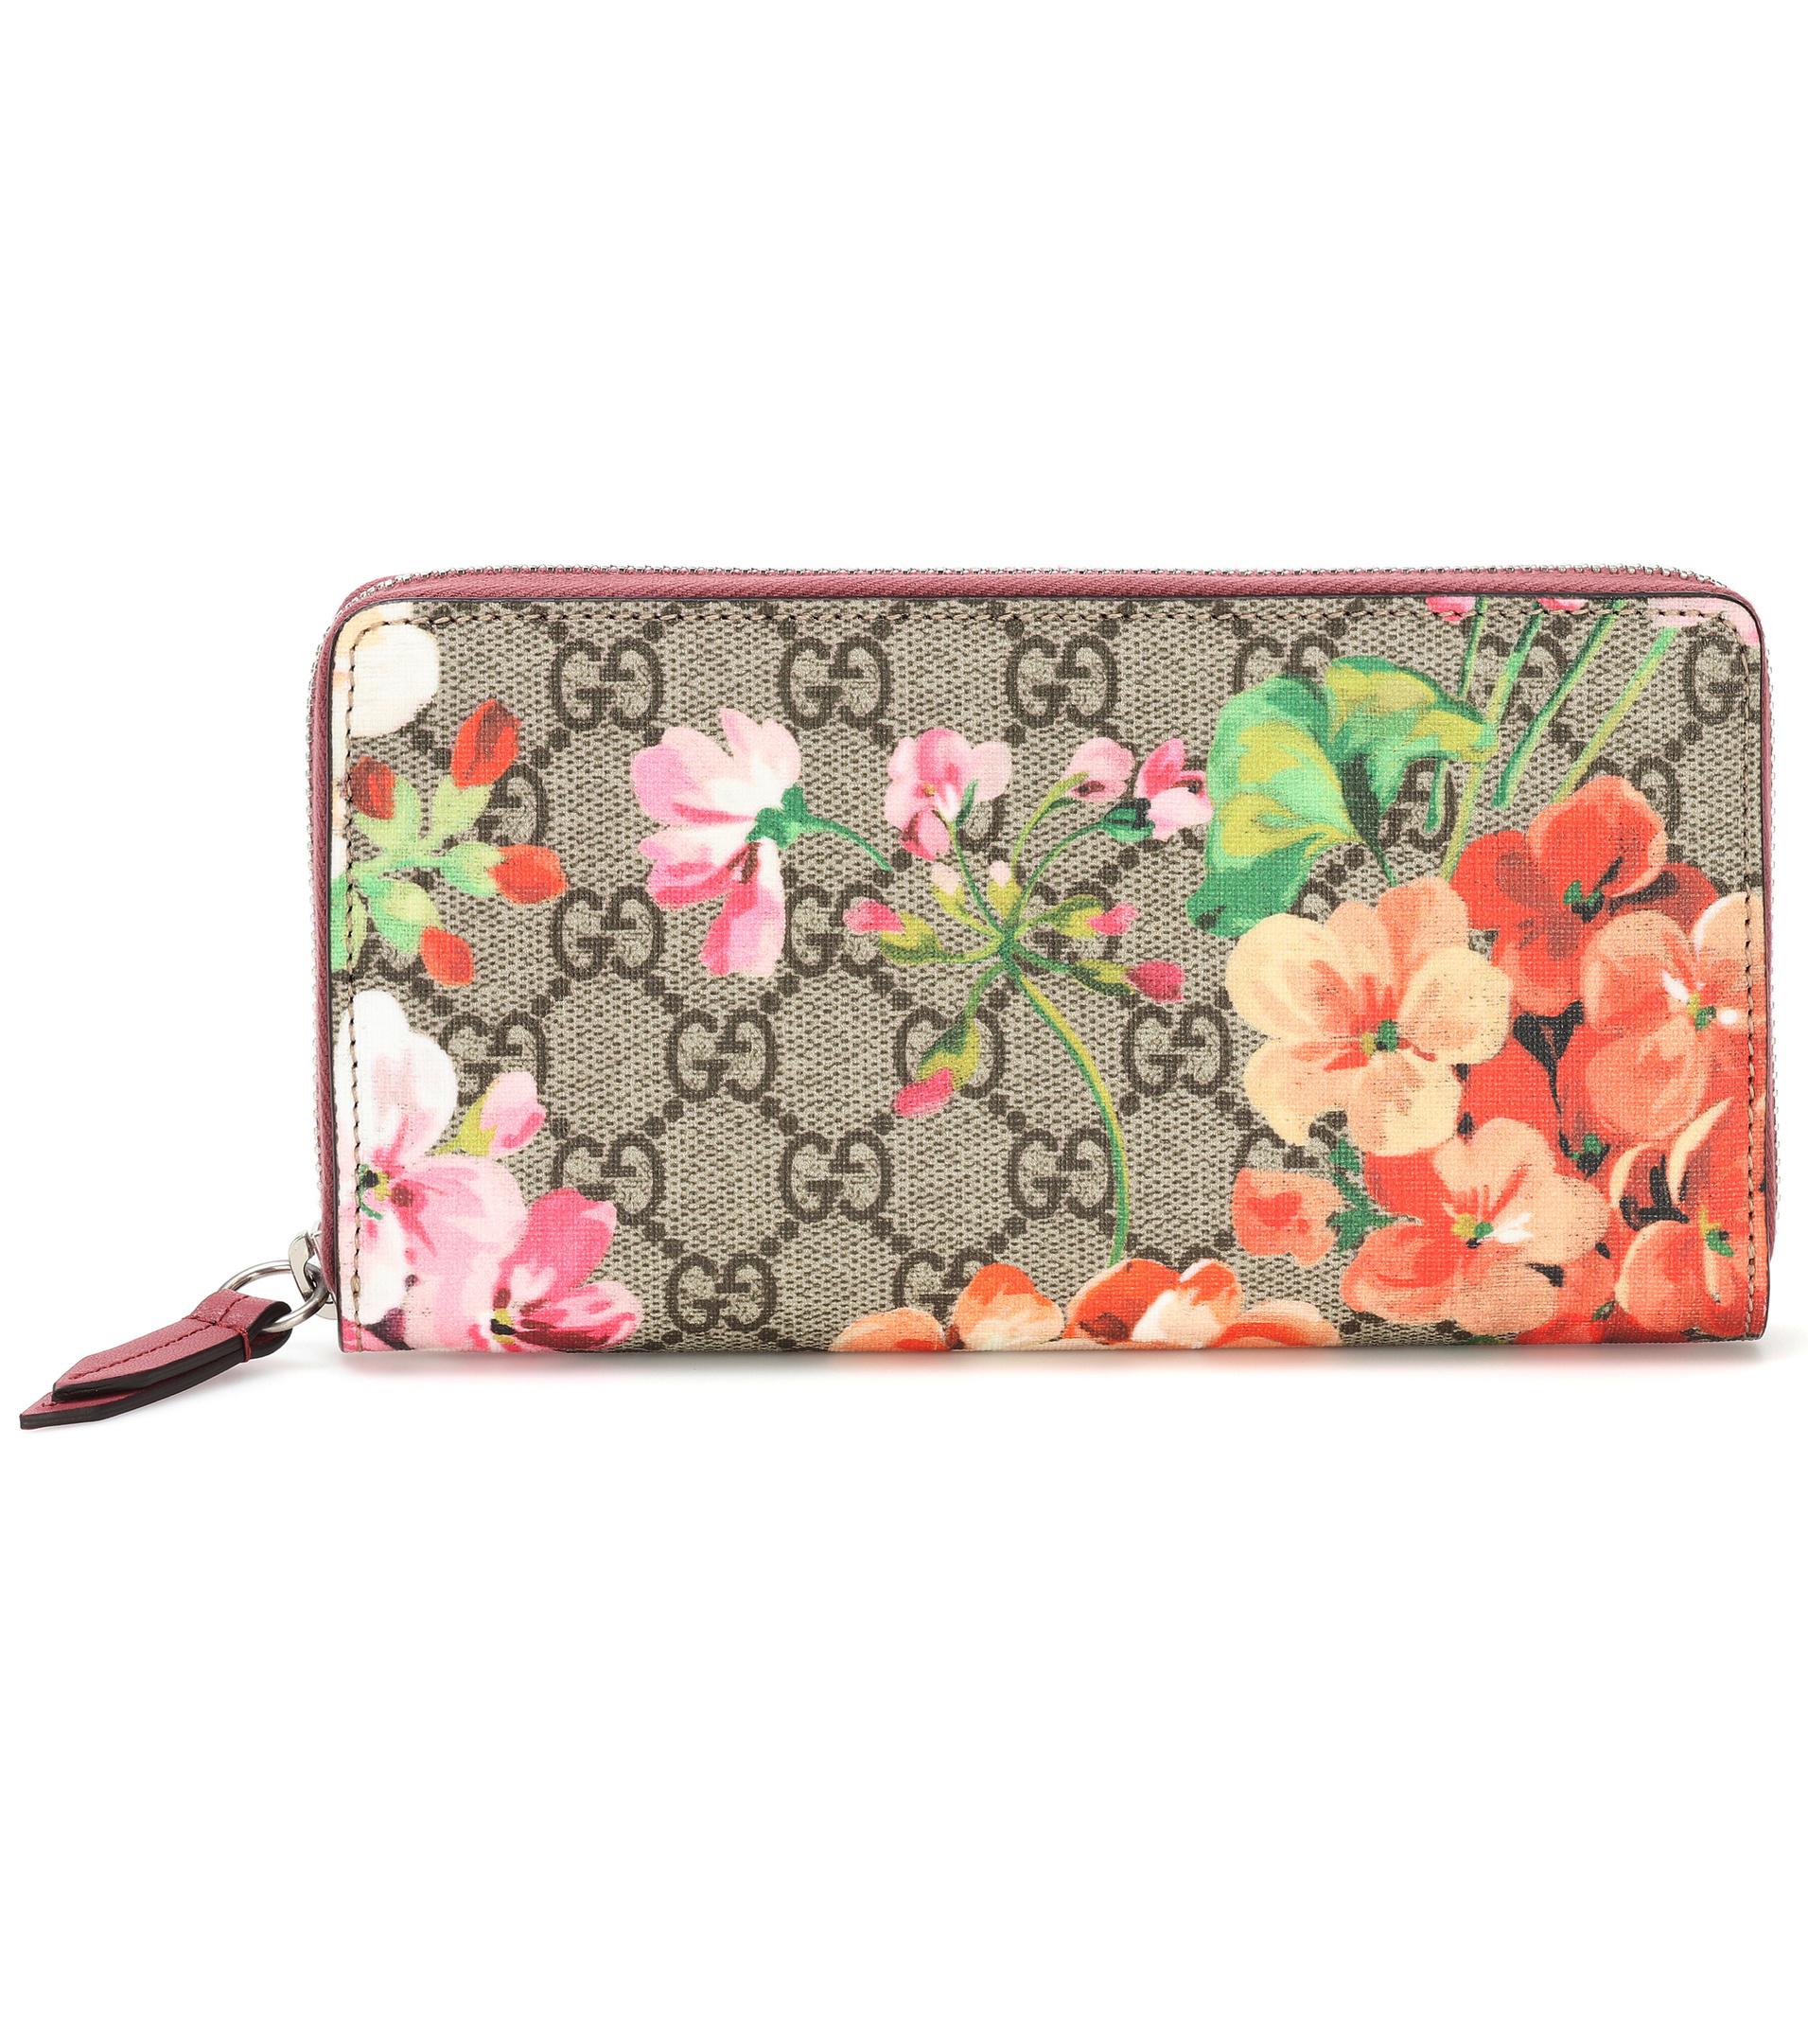 Gucci Blooms Gg Supreme Coated-canvas Wallet in Pink - Lyst